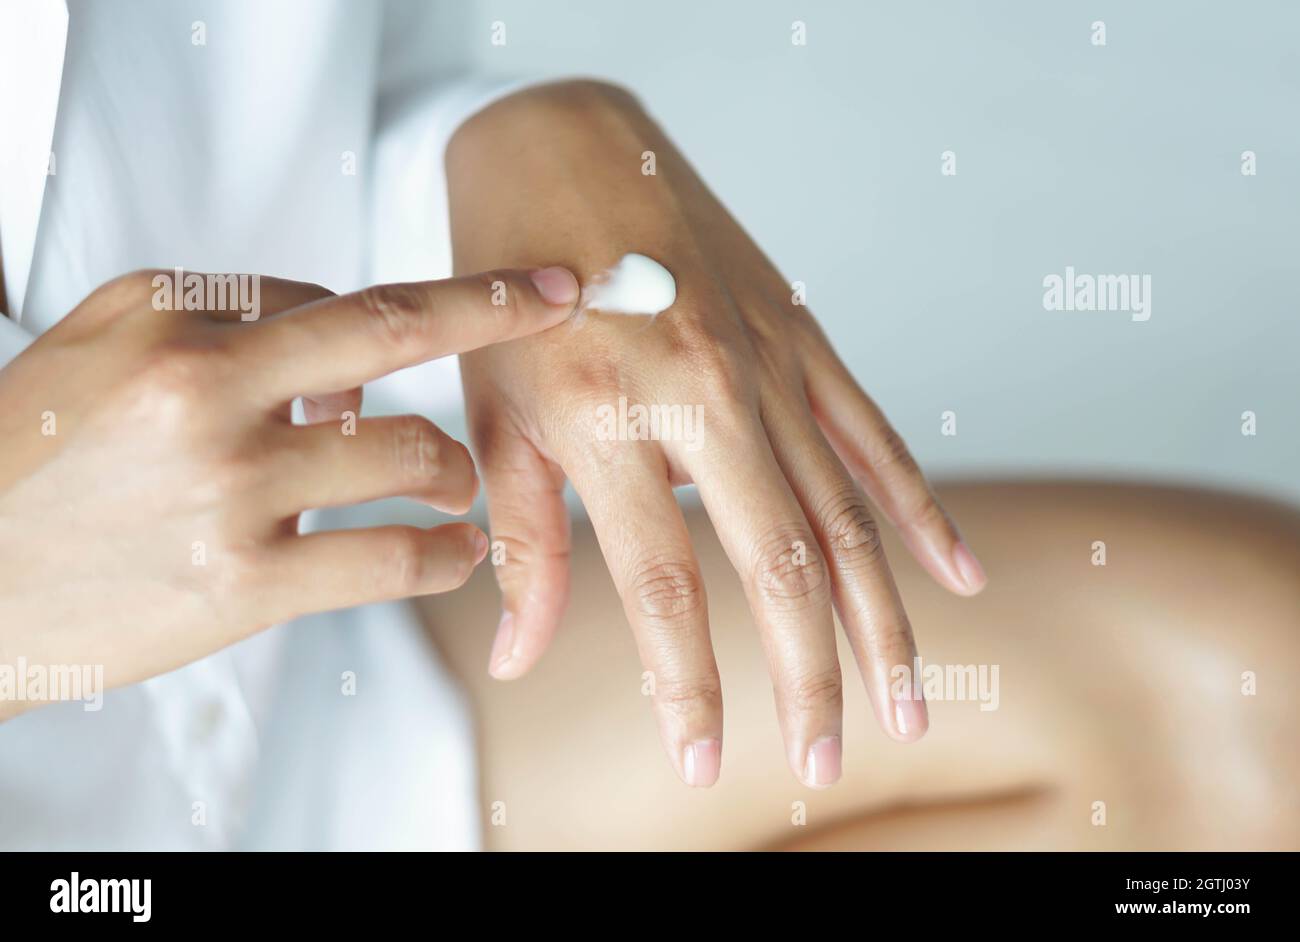 Midsection Of Woman Applying Moisturizer Stock Photo